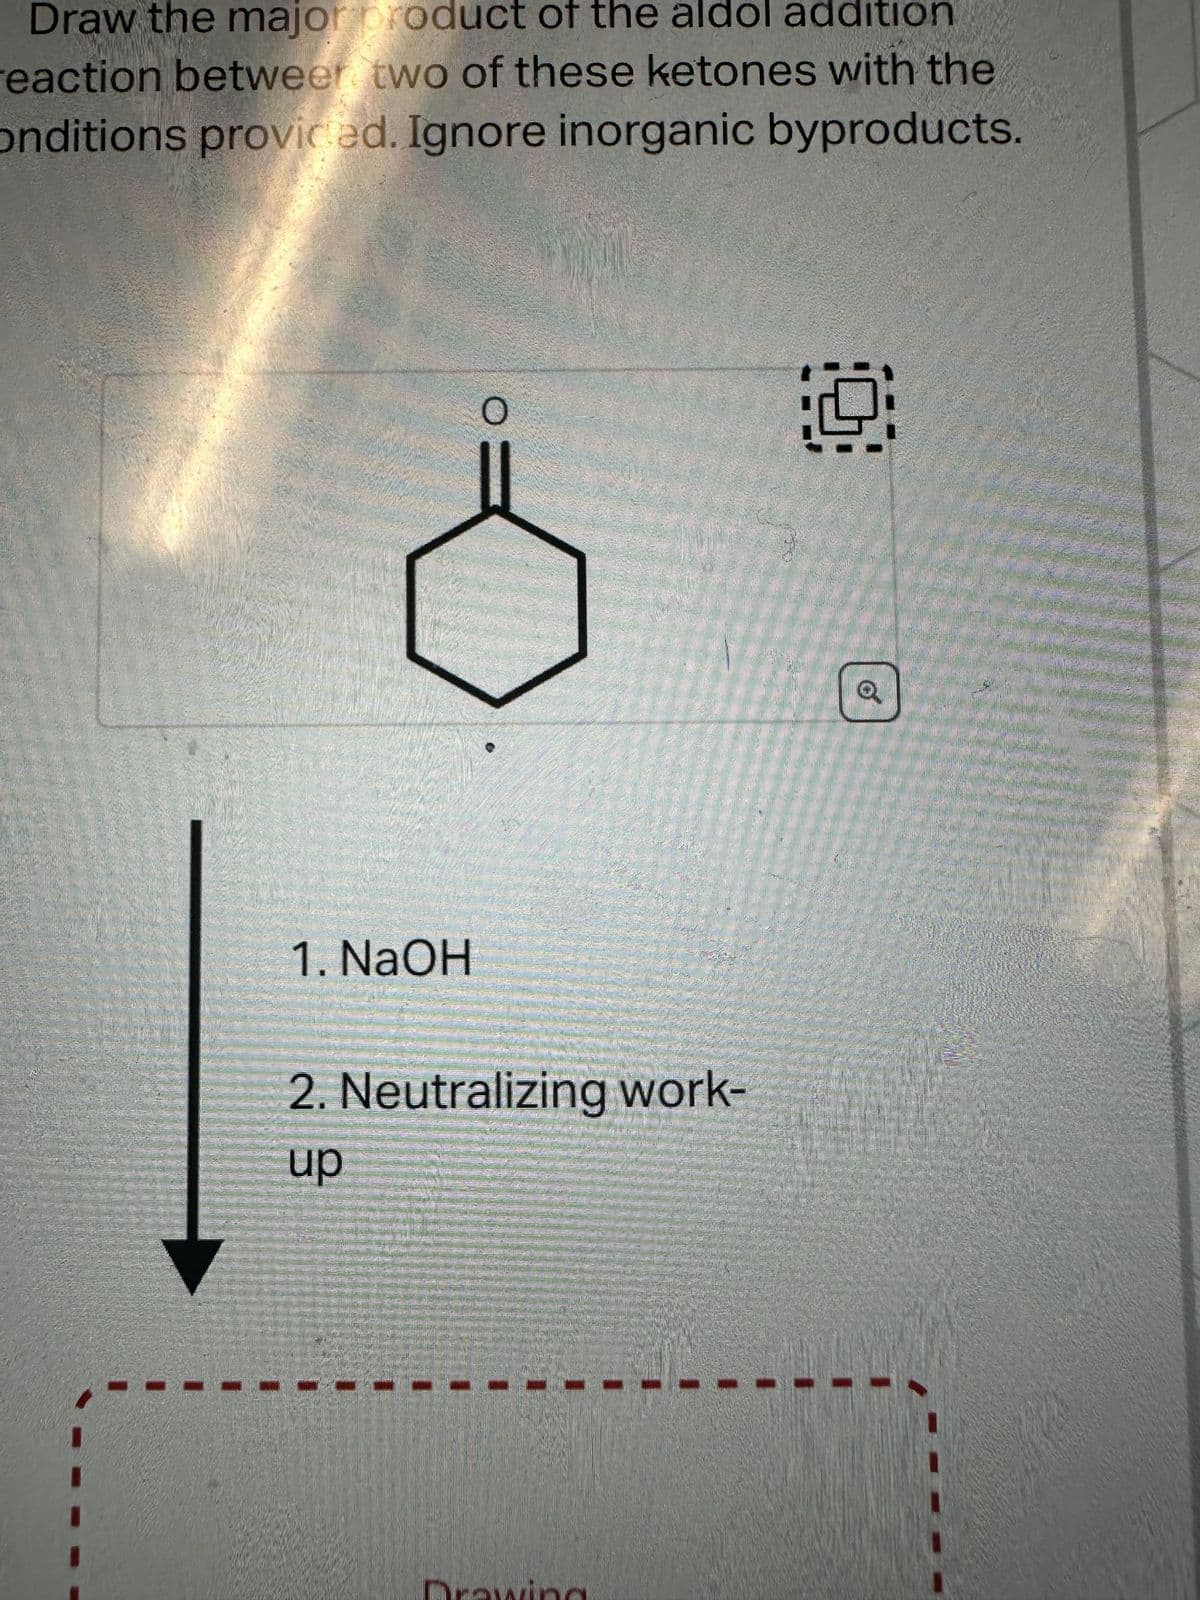 Draw the major product of the aldol addition
reaction between two of these ketones with the
onditions provided. Ignore inorganic byproducts.
1. NaOH
O
2. Neutralizing work-
up
19